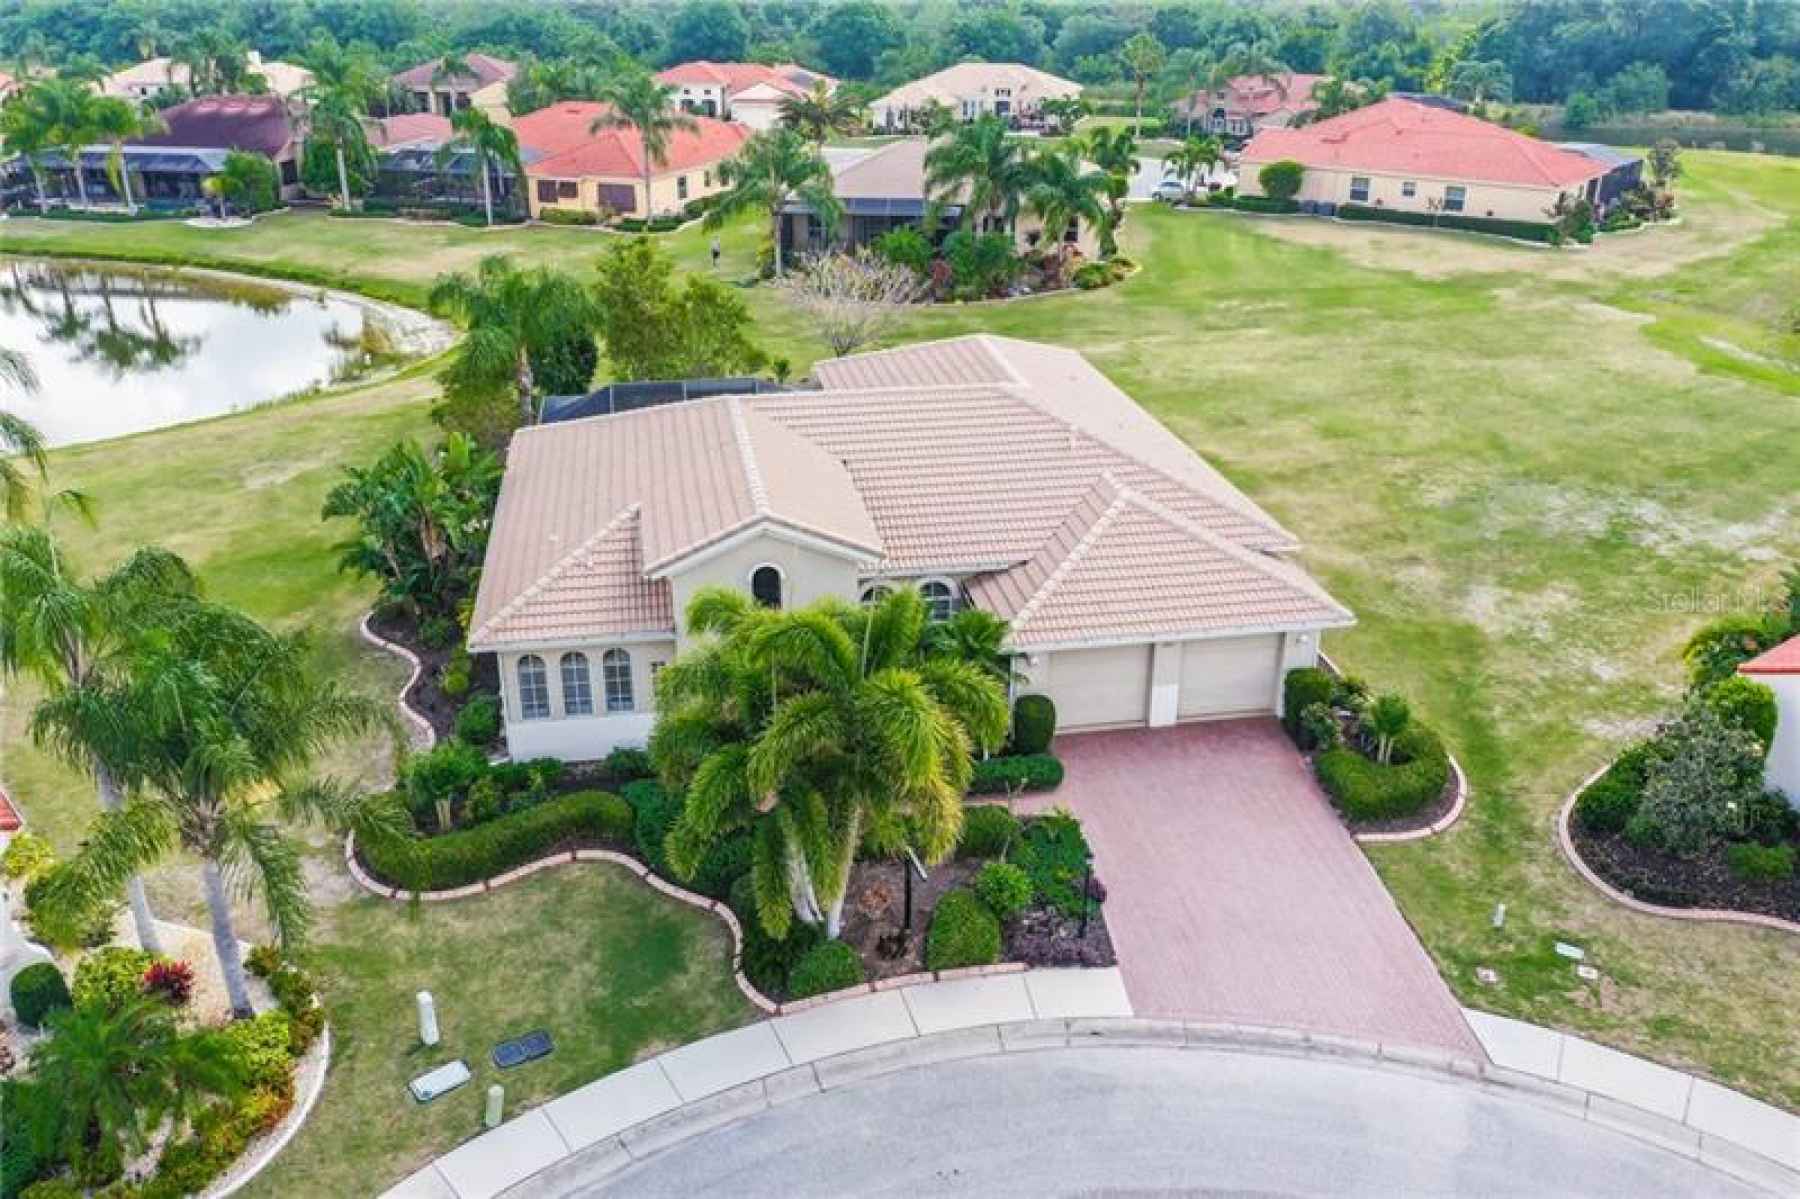 Water view, executive style home with custom brick paved driveway, tile roof and stunning landscape,